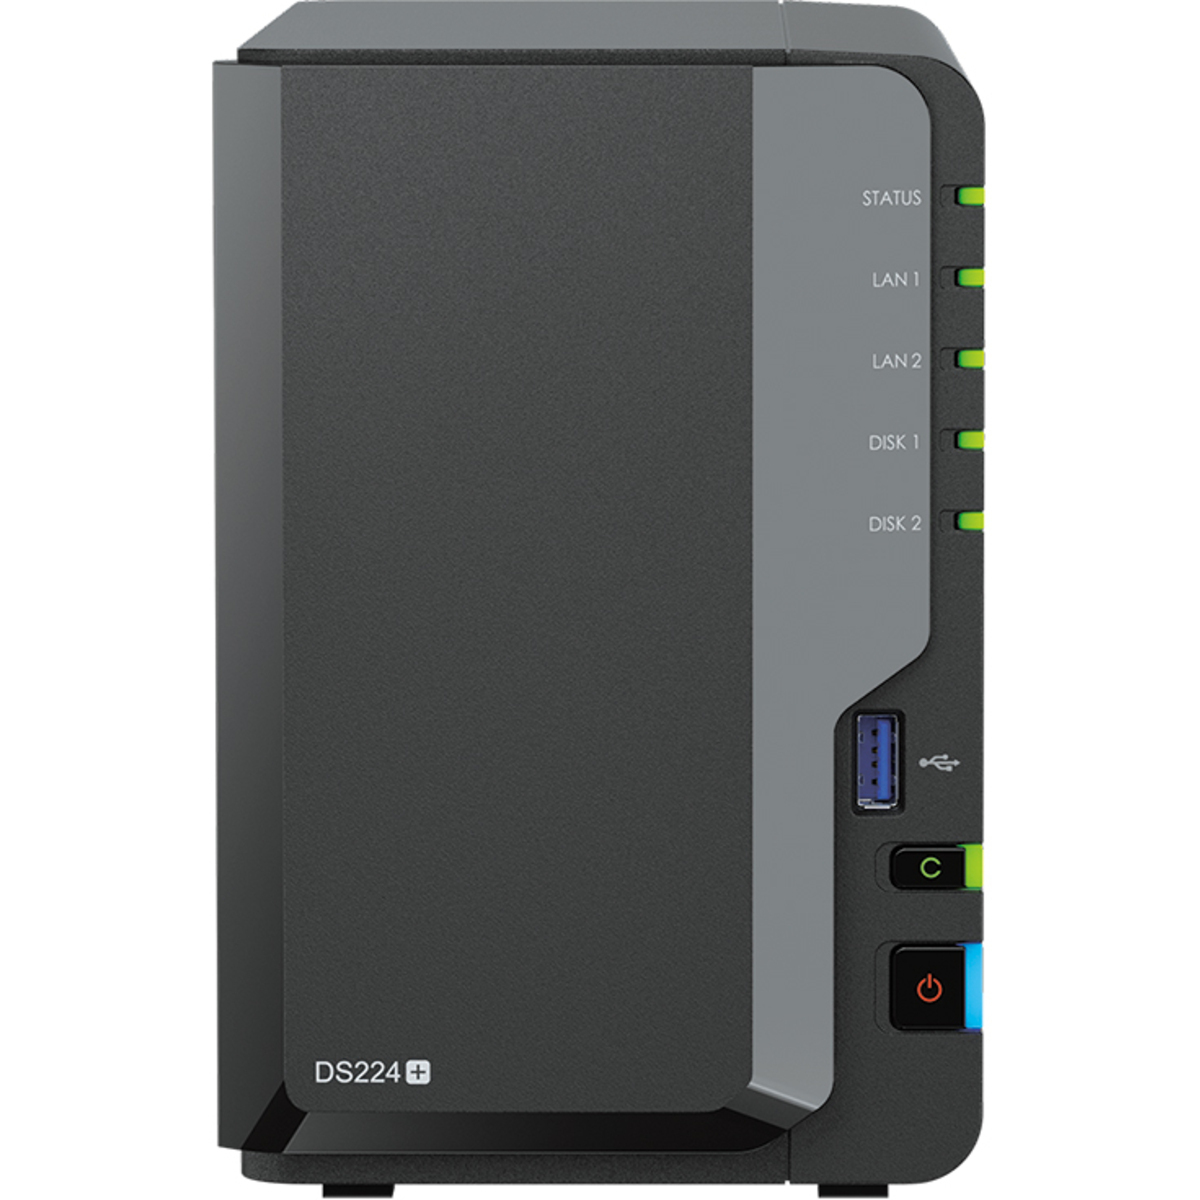 Synology DiskStation DS224+ 6tb 2-Bay Desktop Personal / Basic Home / Small Office NAS - Network Attached Storage Device 1x6tb Western Digital Red Plus WD60EFPX 3.5 5640rpm SATA 6Gb/s HDD NAS Class Drives Installed - Burn-In Tested - ON SALE - FREE RAM UPGRADE DiskStation DS224+